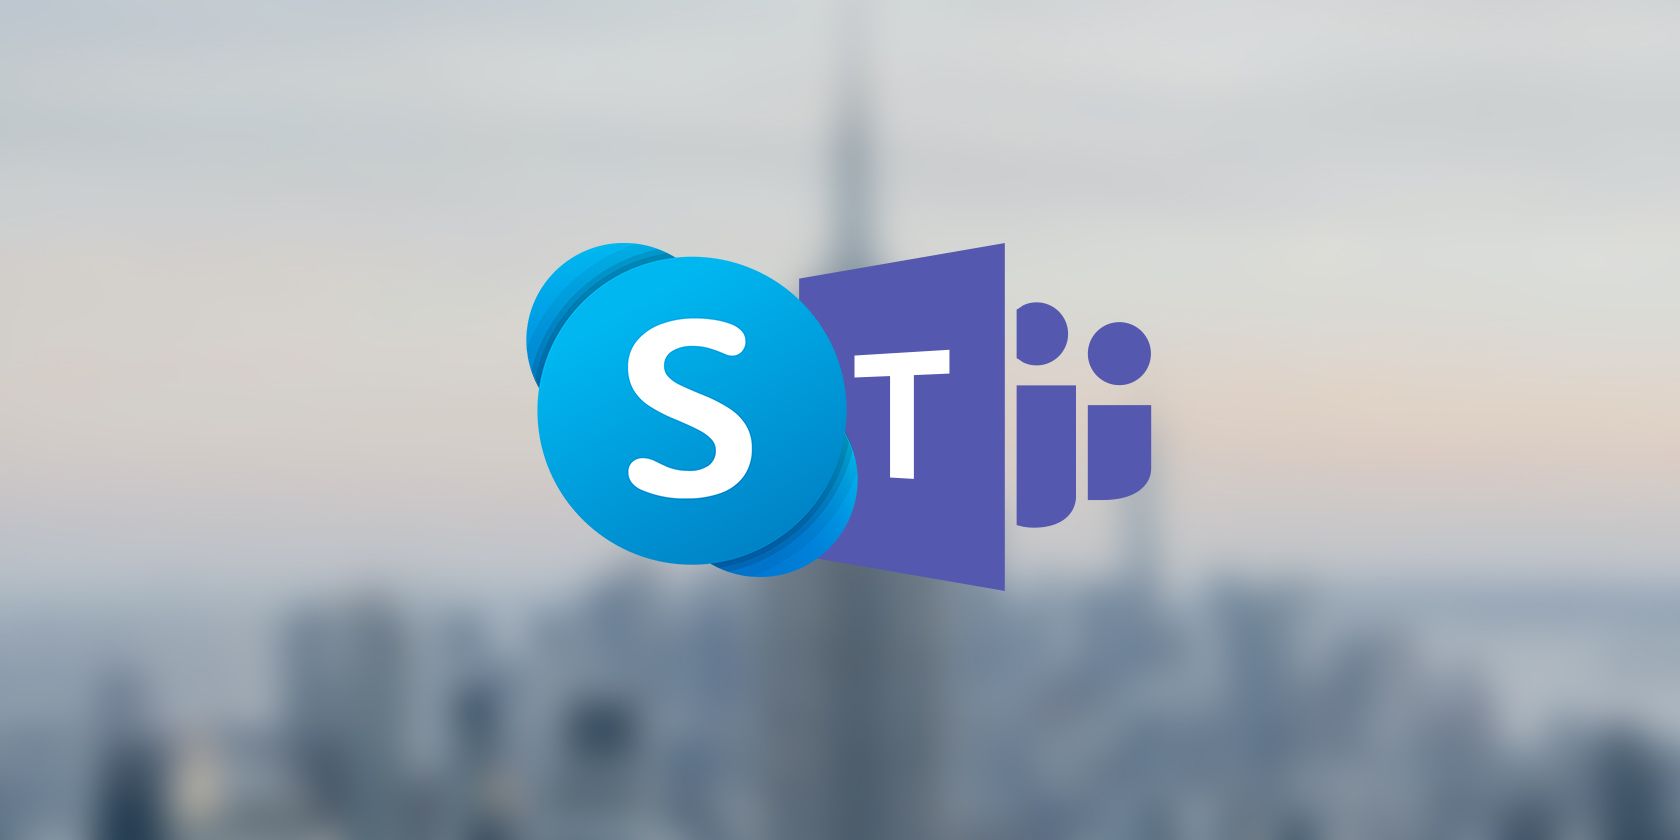 Skype and teams logo on a blurred background